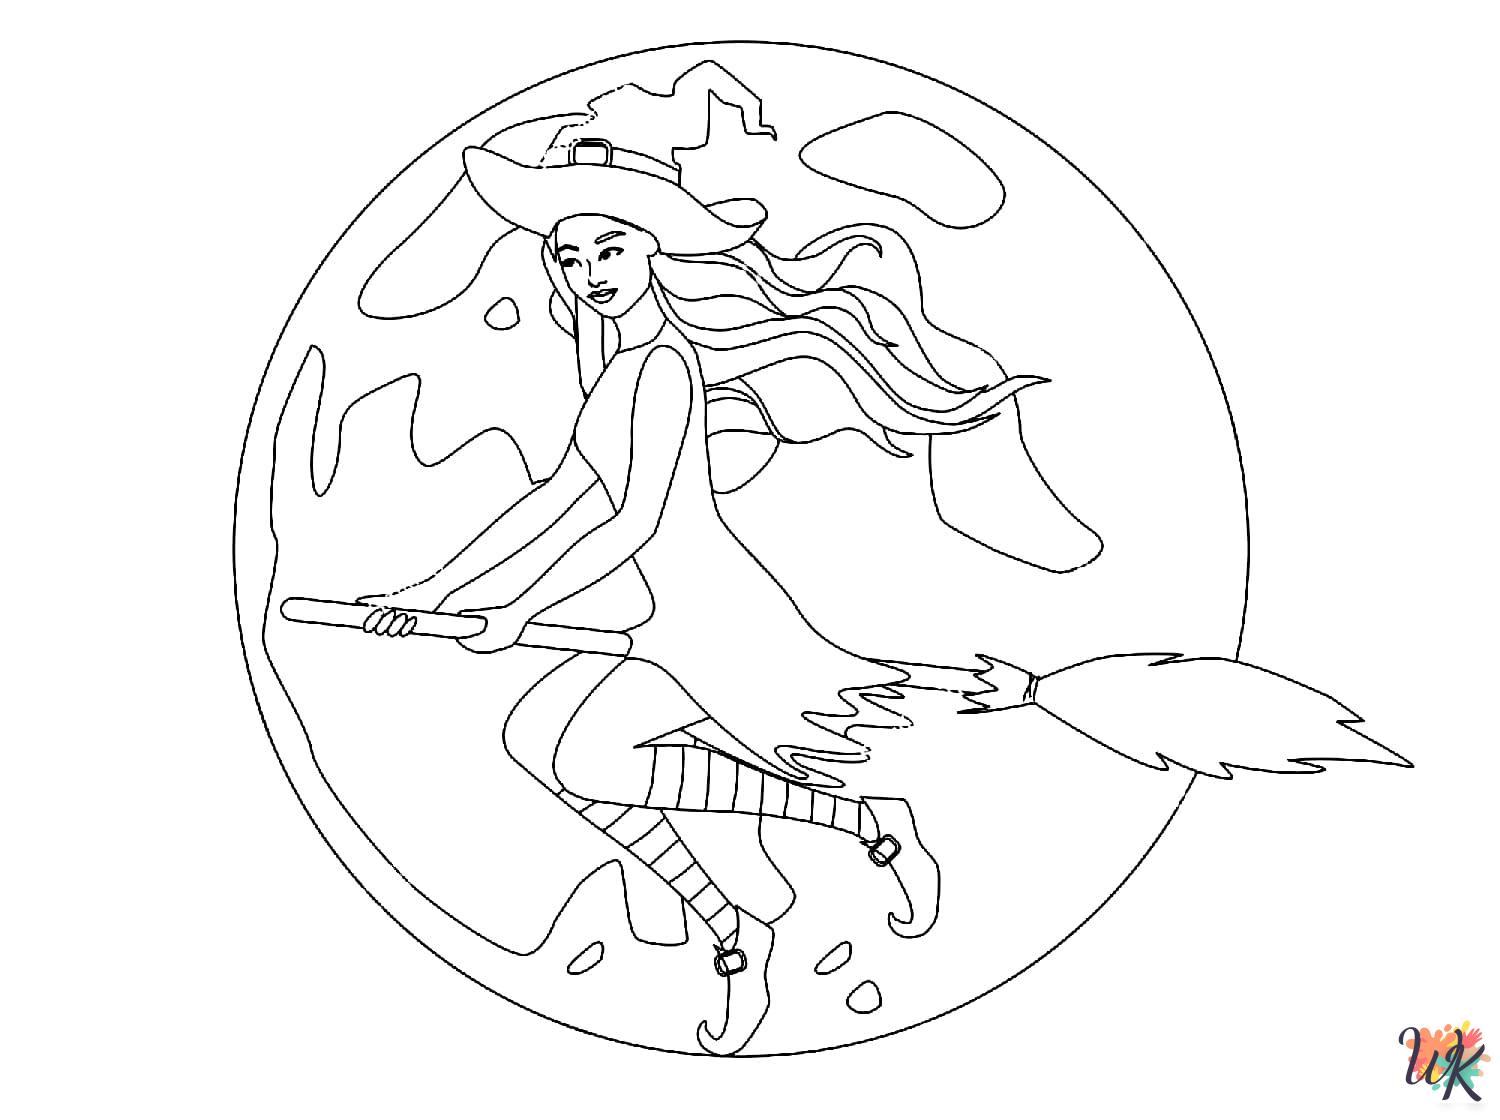 Witch coloring pages for adults easy